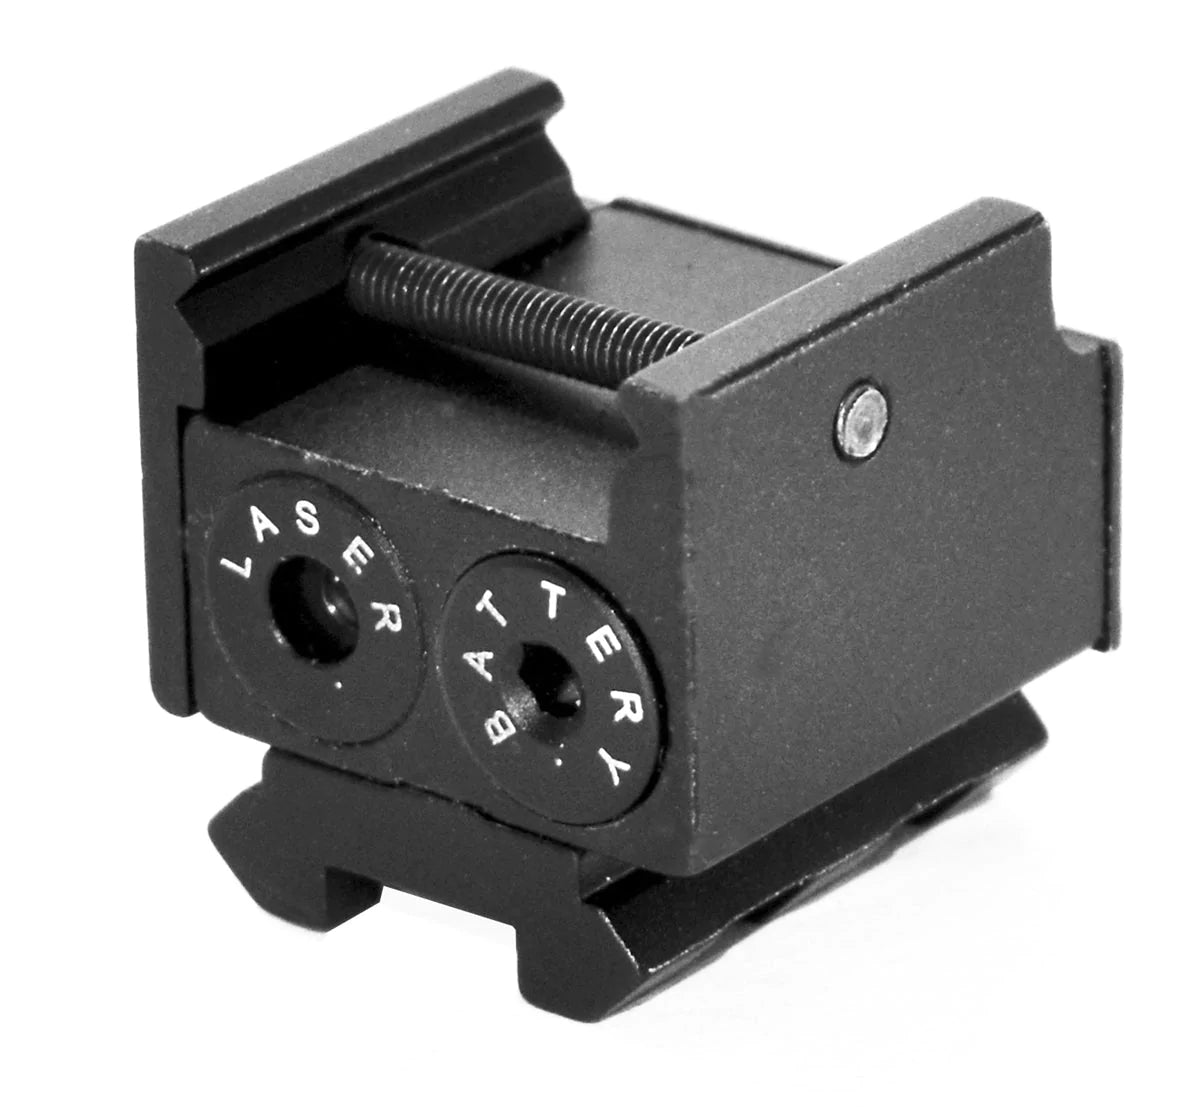 Trinity red dot Sight for Glock gen 3 4 Full Size Compact 17 19 20 21 22 23 31 Home Defense Tactical Picatinny Weaver Mount Adapter Base.